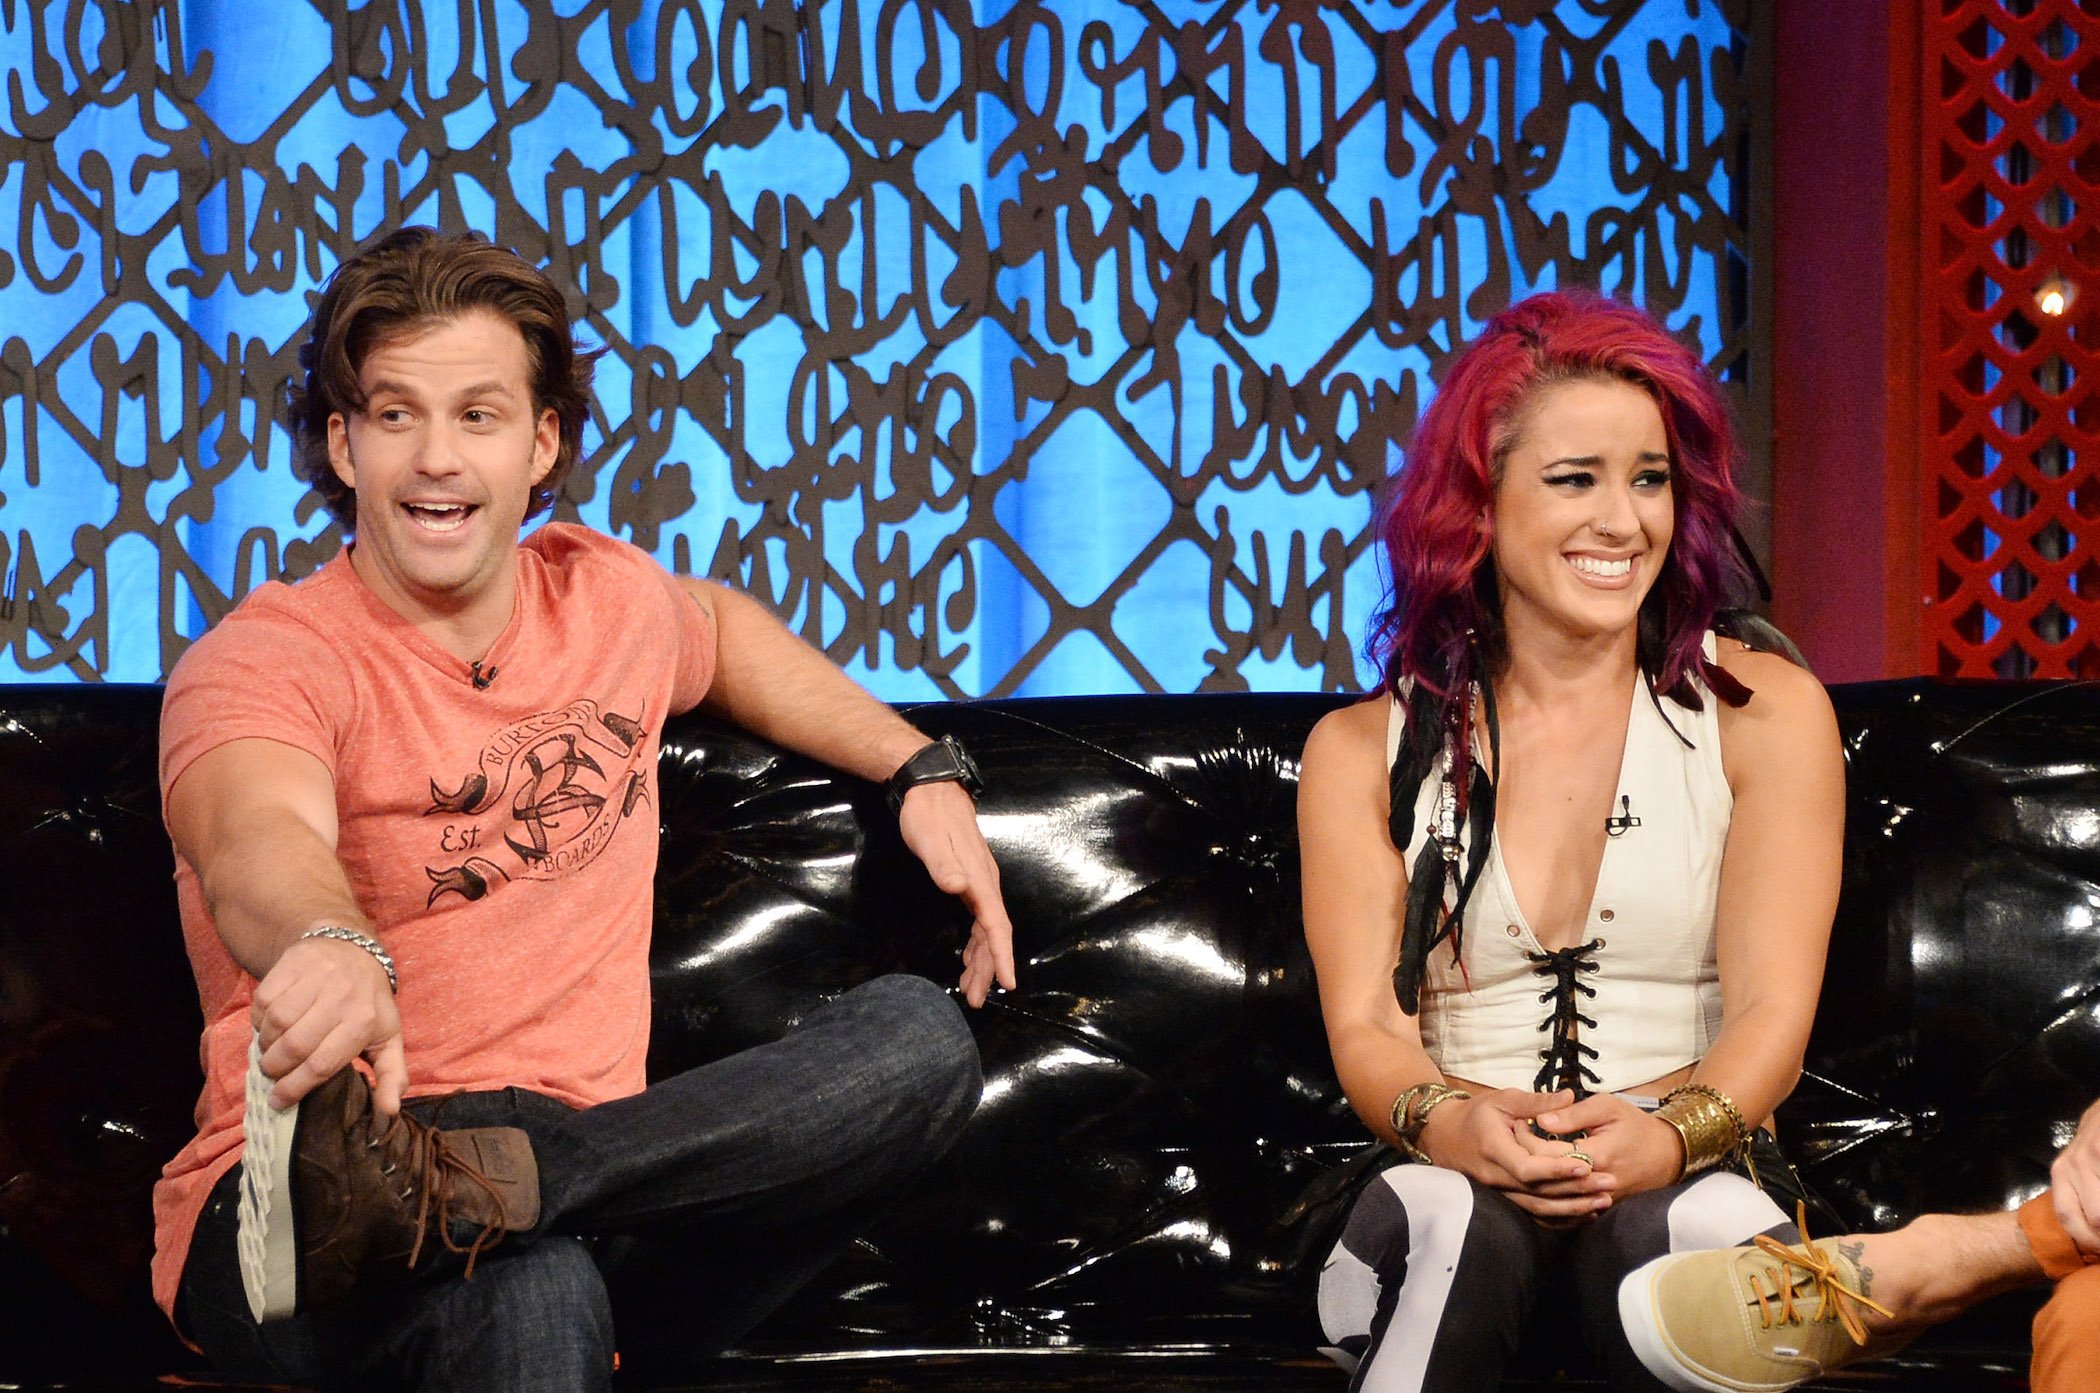 Cara Maria Sorbello sitting next to Johnny 'Bananas' Devenanzio on a couch at MTV's 'The Challenge: Rivals II' final episode and reunion party